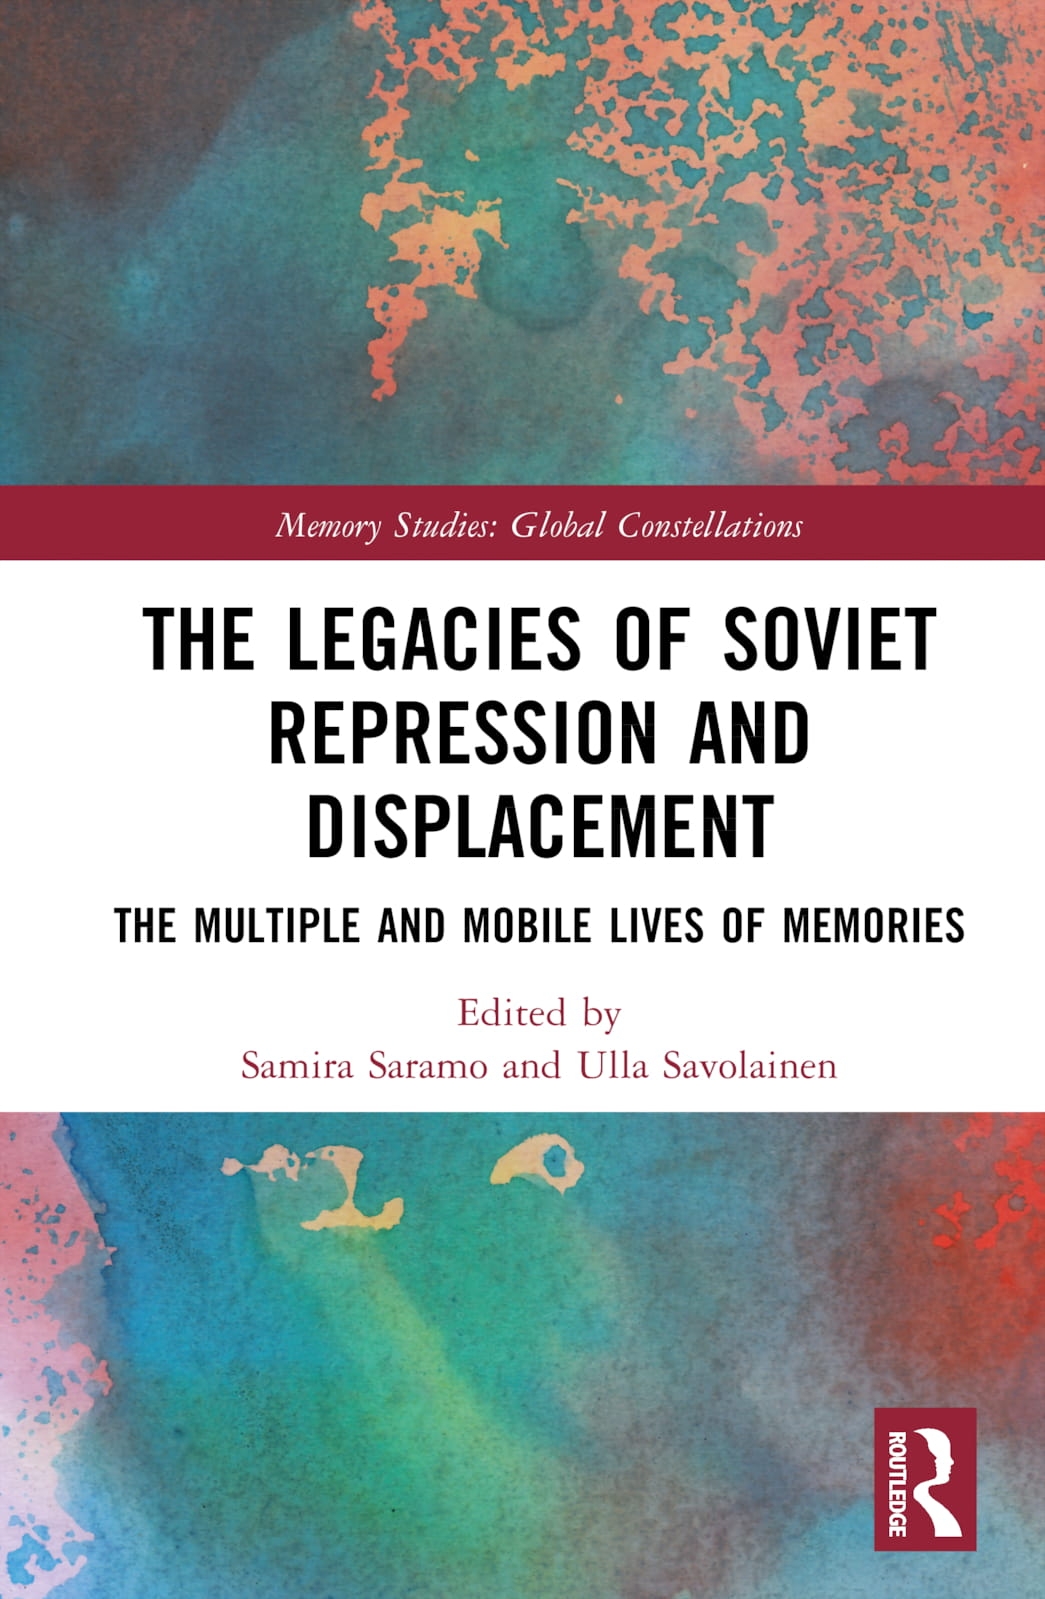 The Legacies of Soviet Repression and Displacement: The Multiple and Mobile Lives of Memories